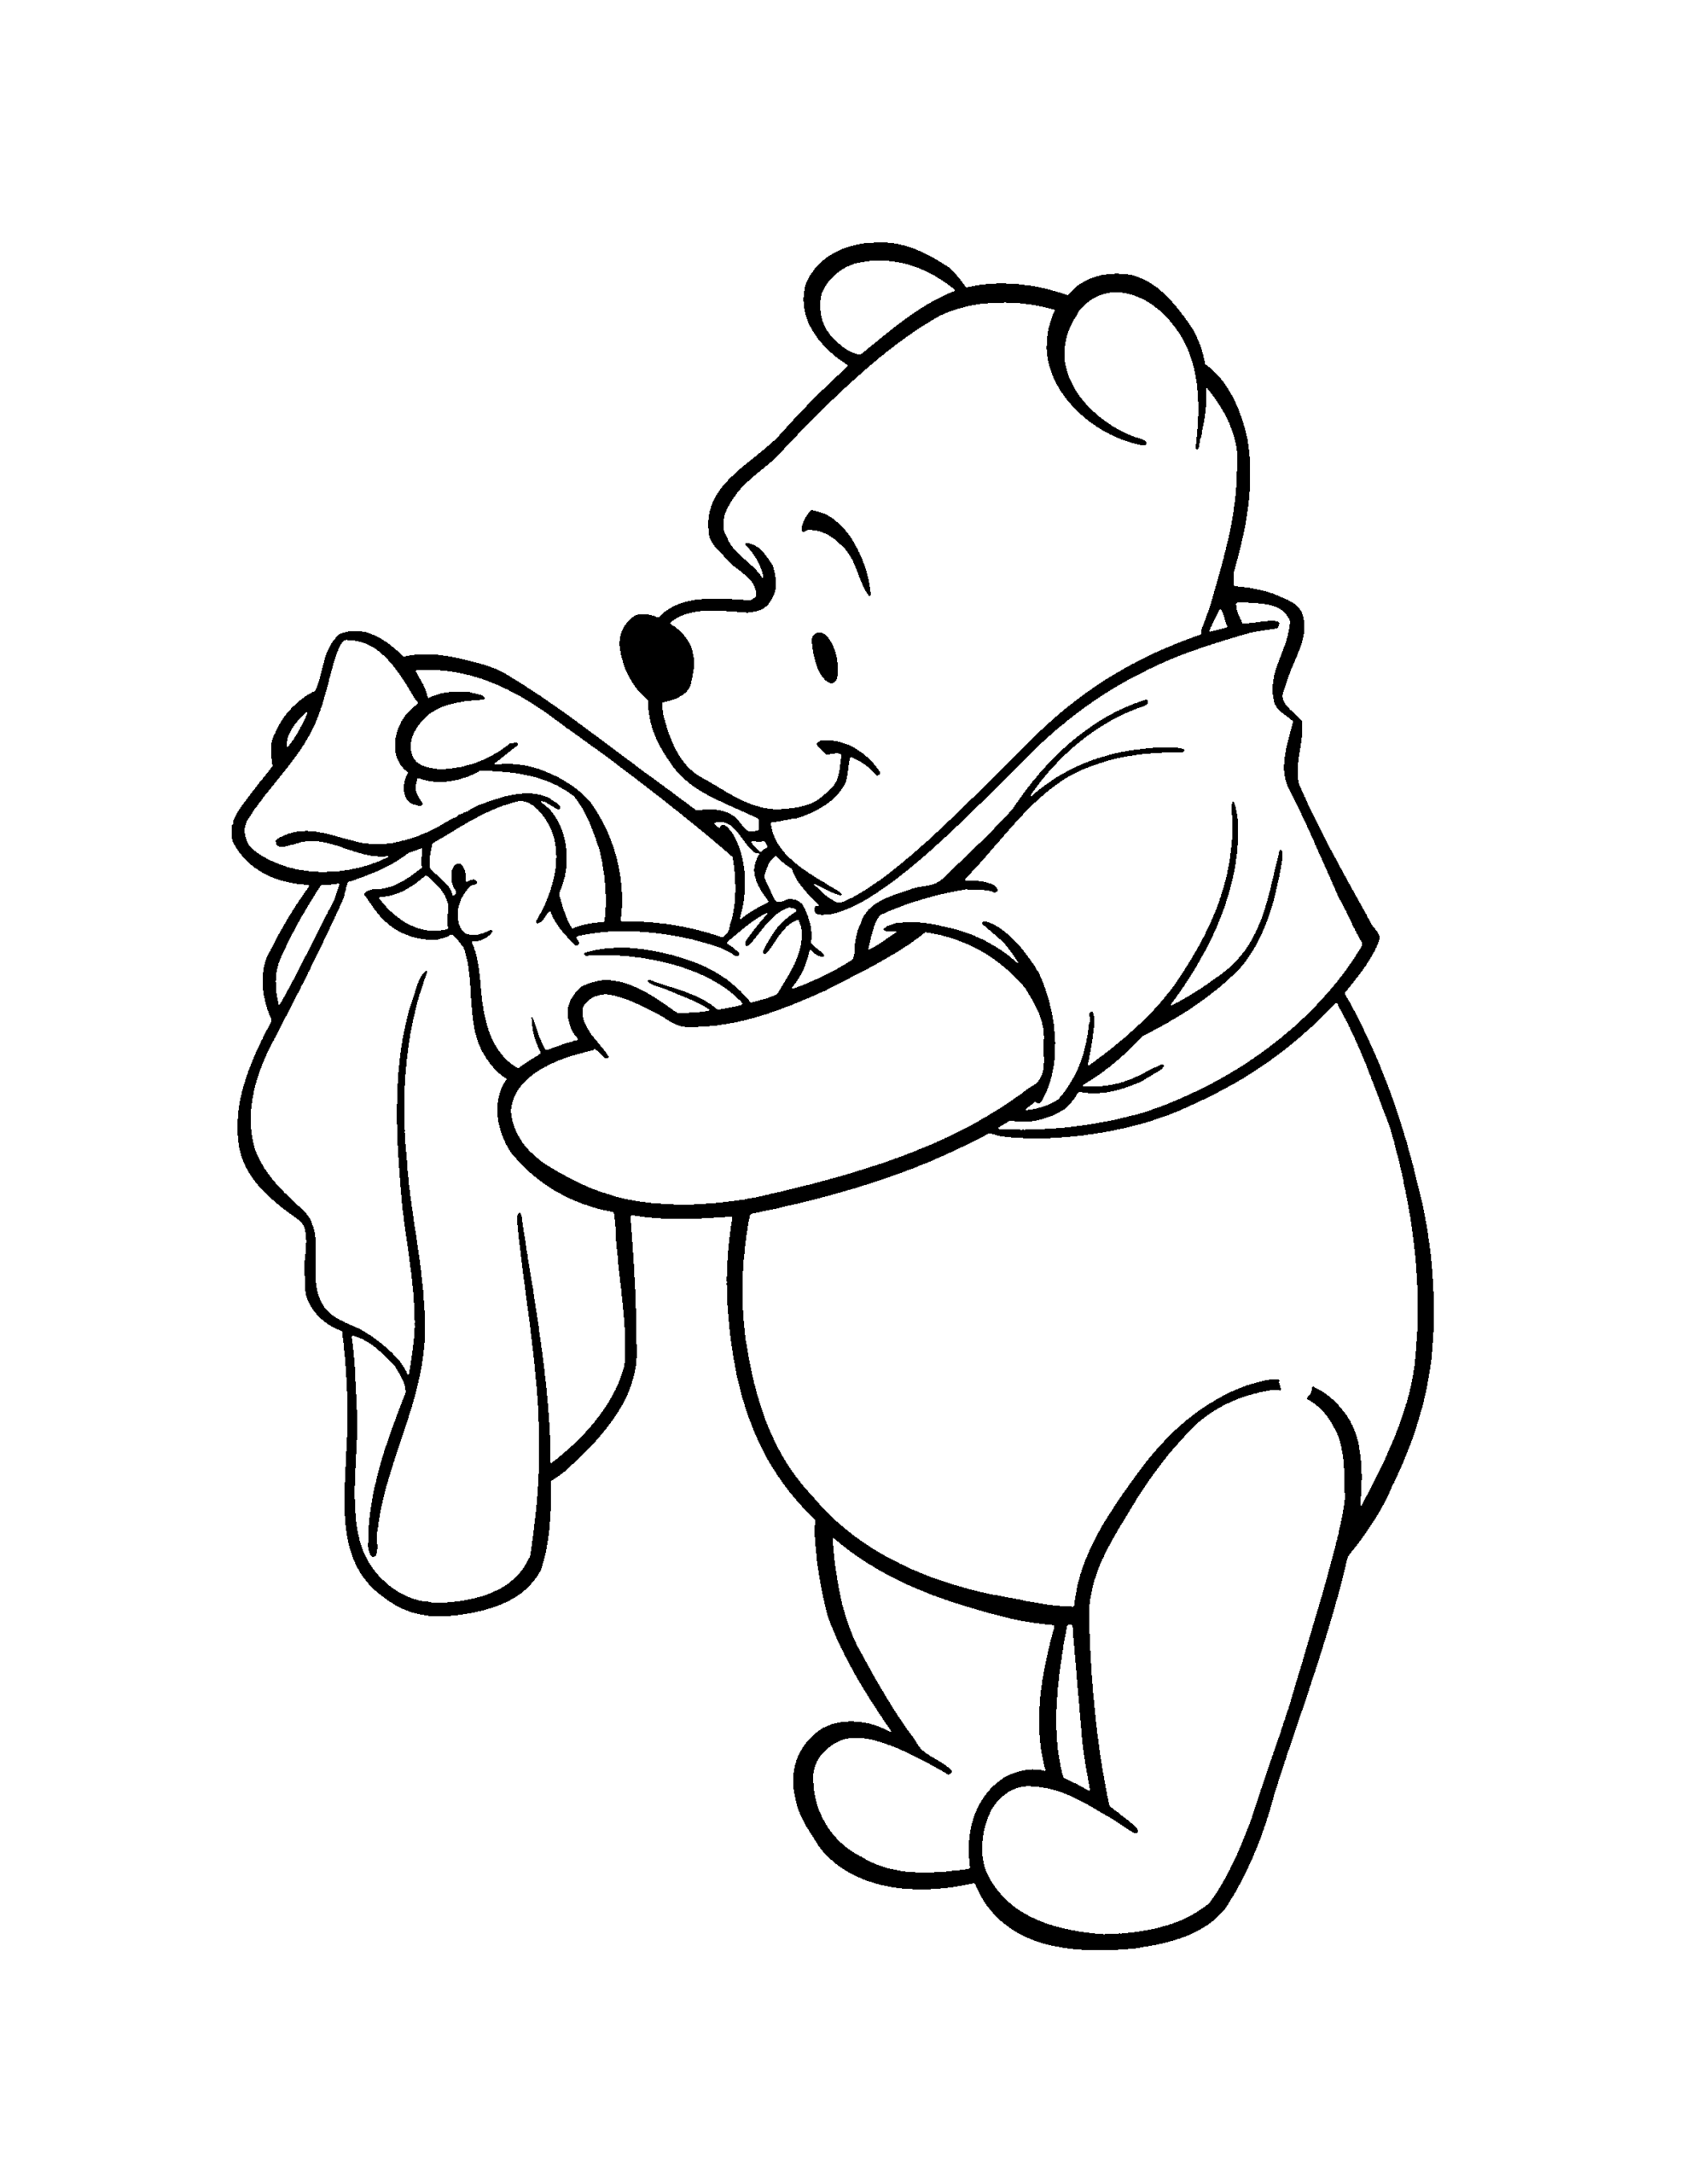 Winnie the Pooh Coloring Pages Cartoons winnie the pooh 100 Printable 2020 7079 Coloring4free